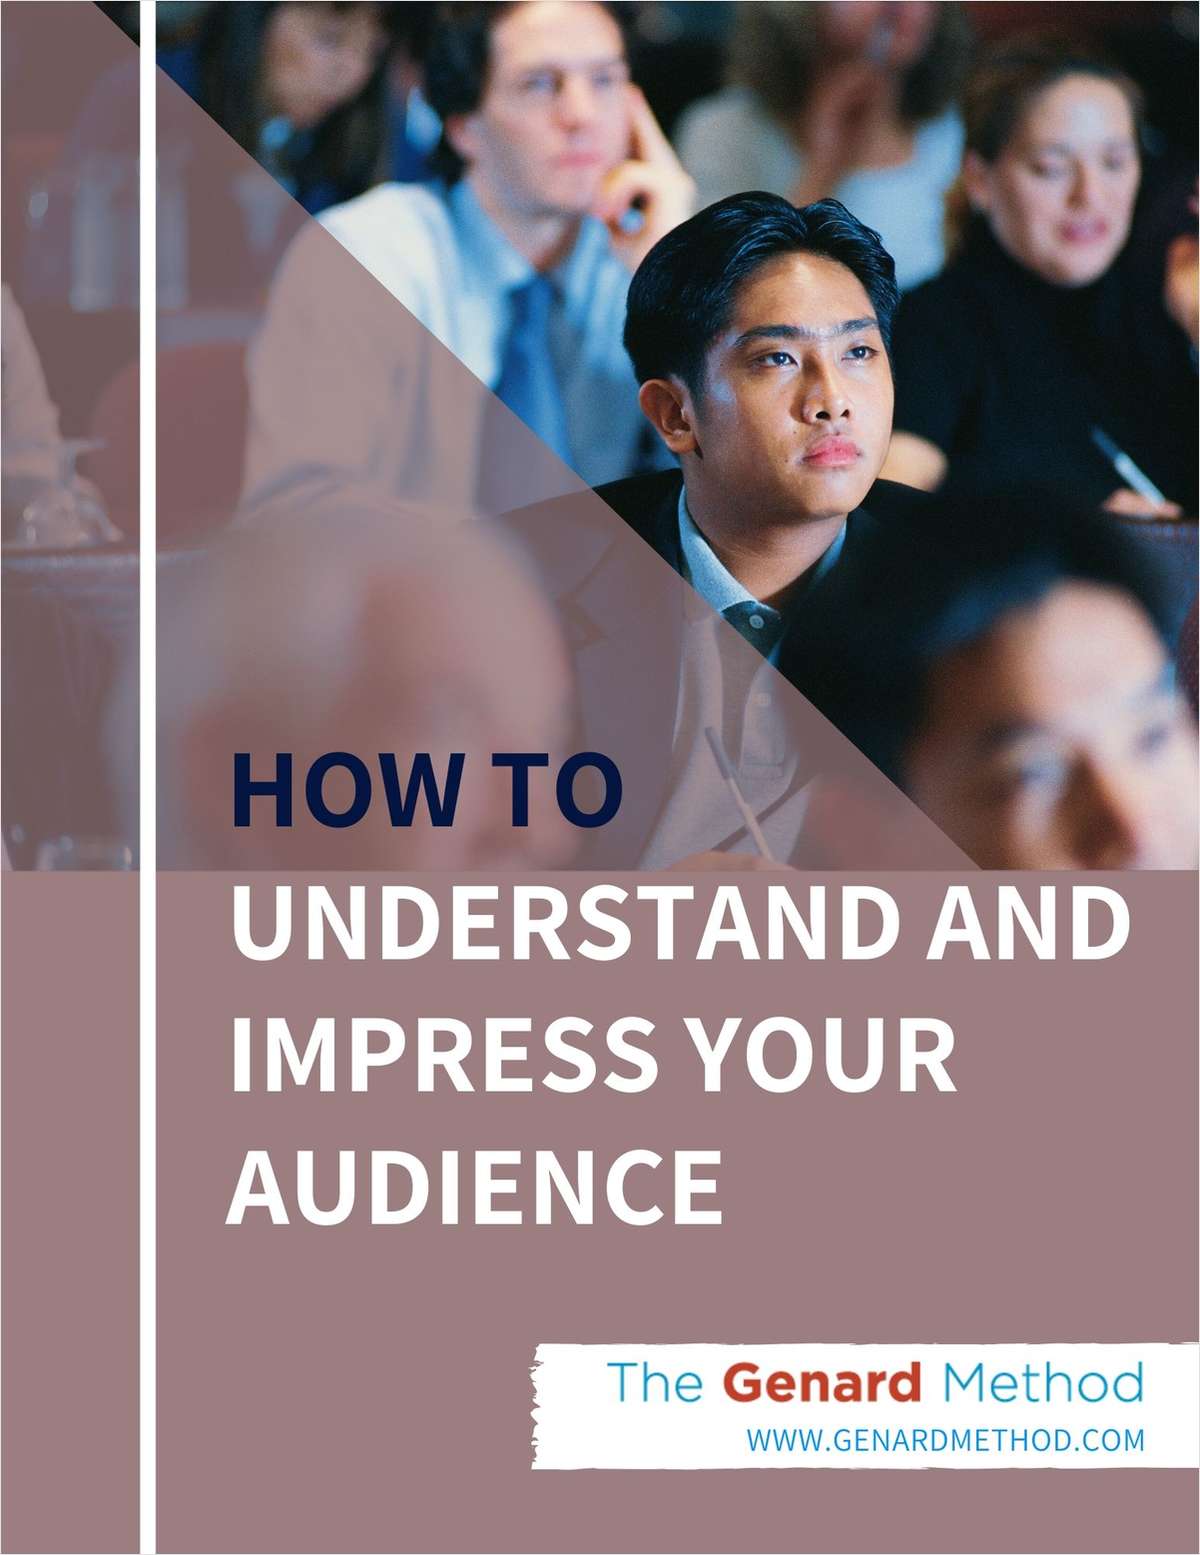 How to Understand and Impress Your Audience